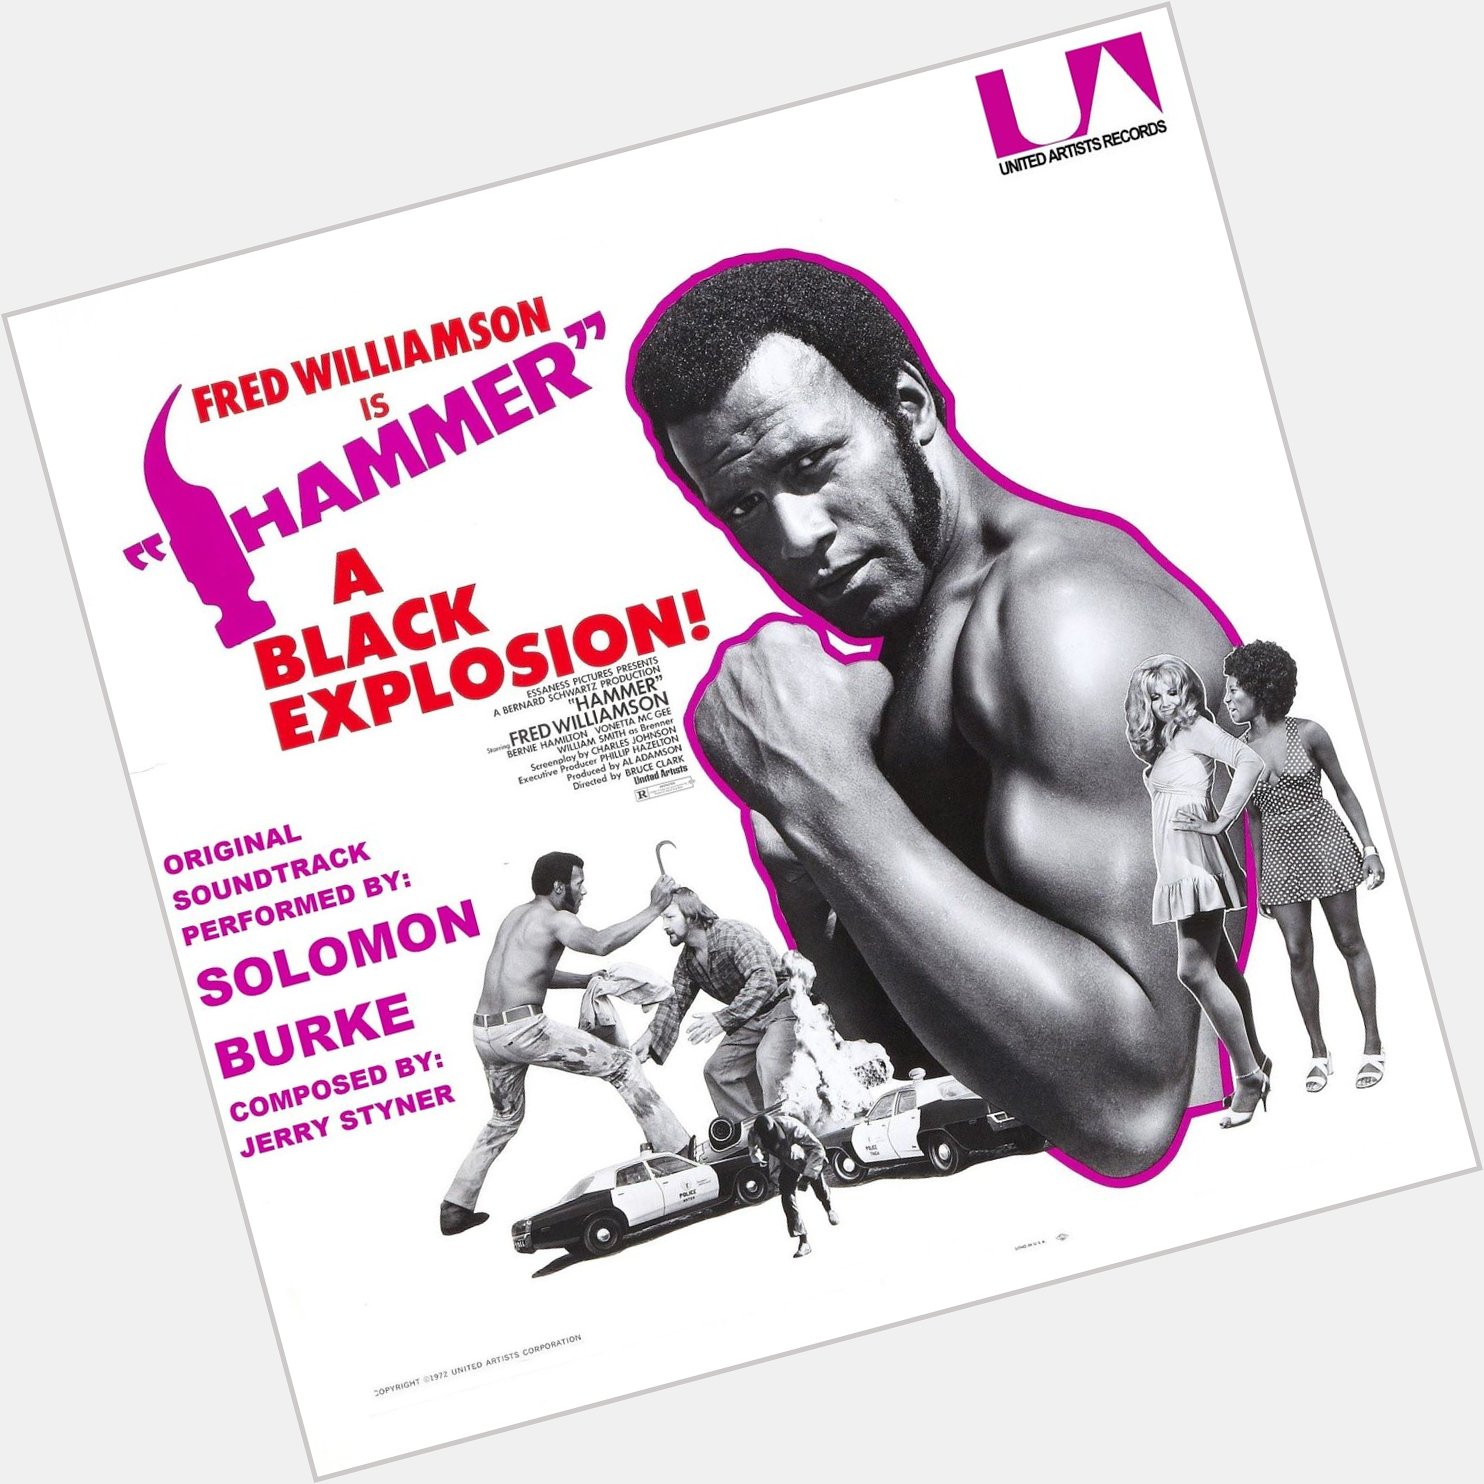 Happy 80th birthday to Fred Williamson! 